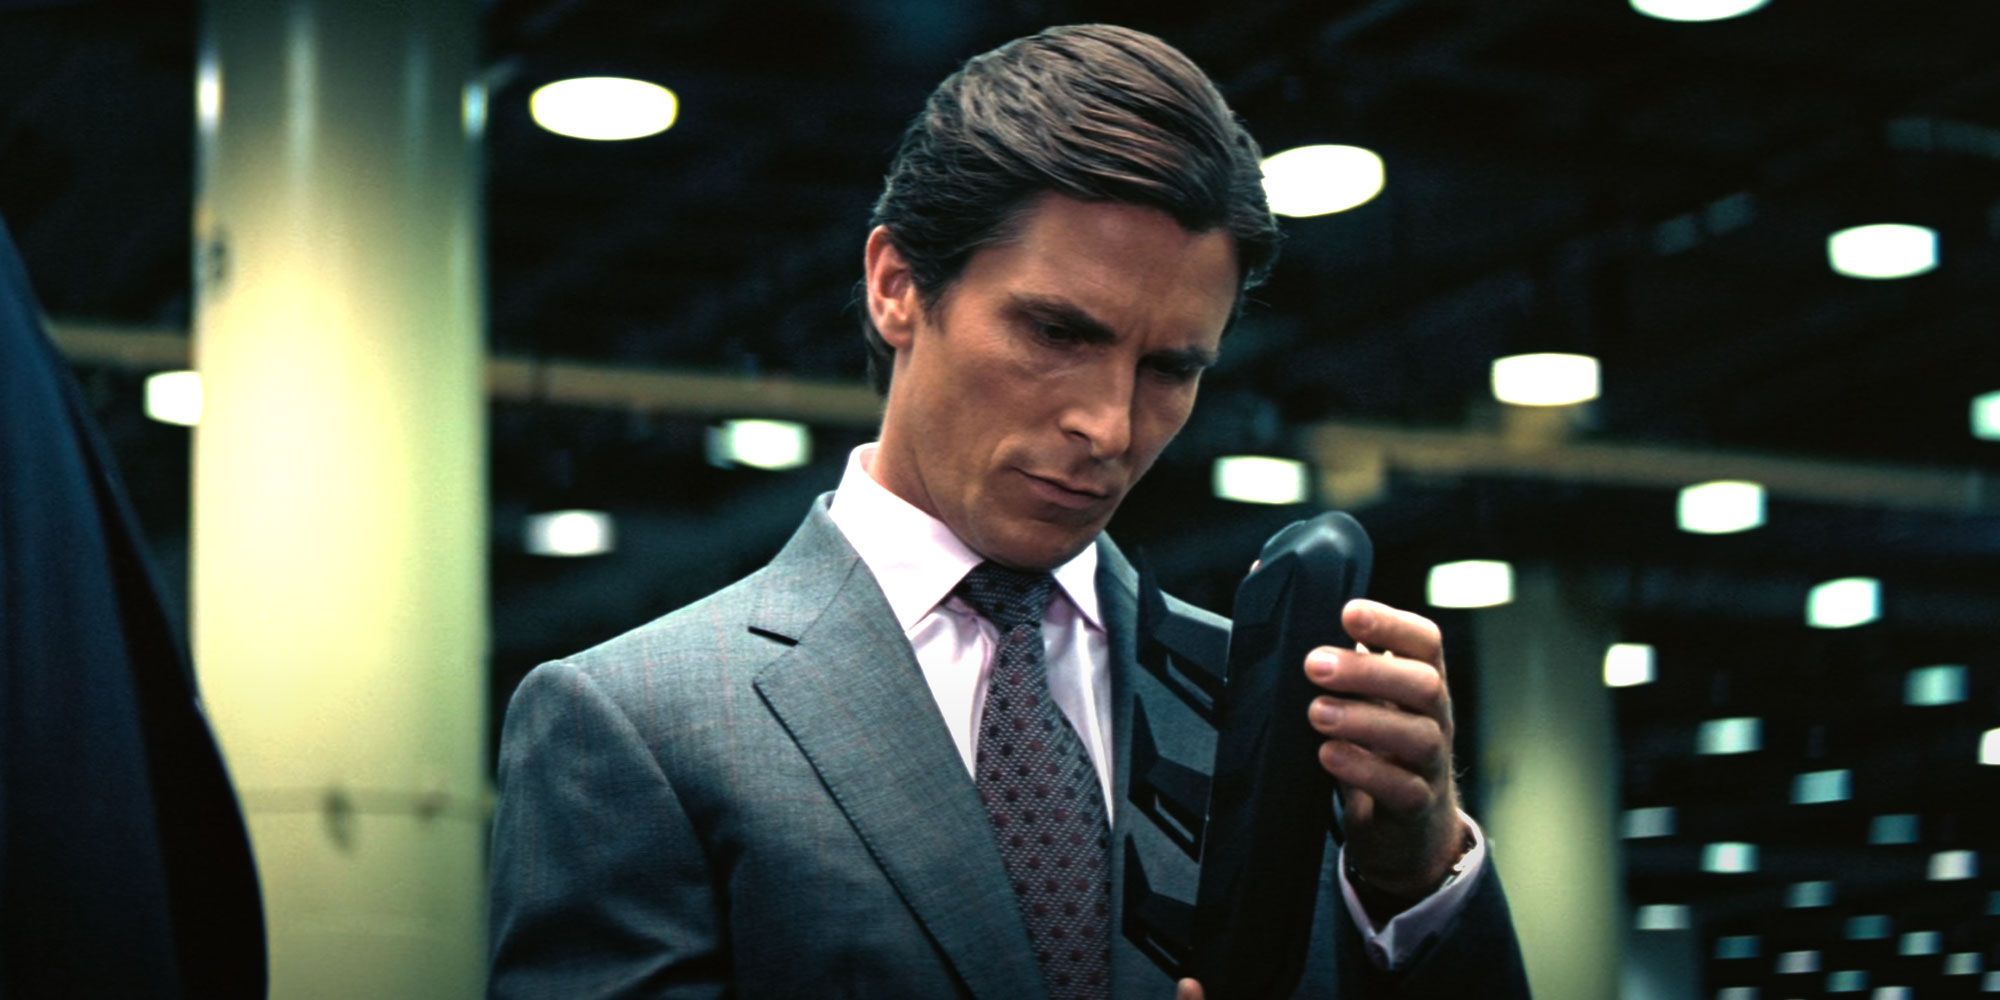 Bruce Wayne (Christian Bale) closely examines a device.